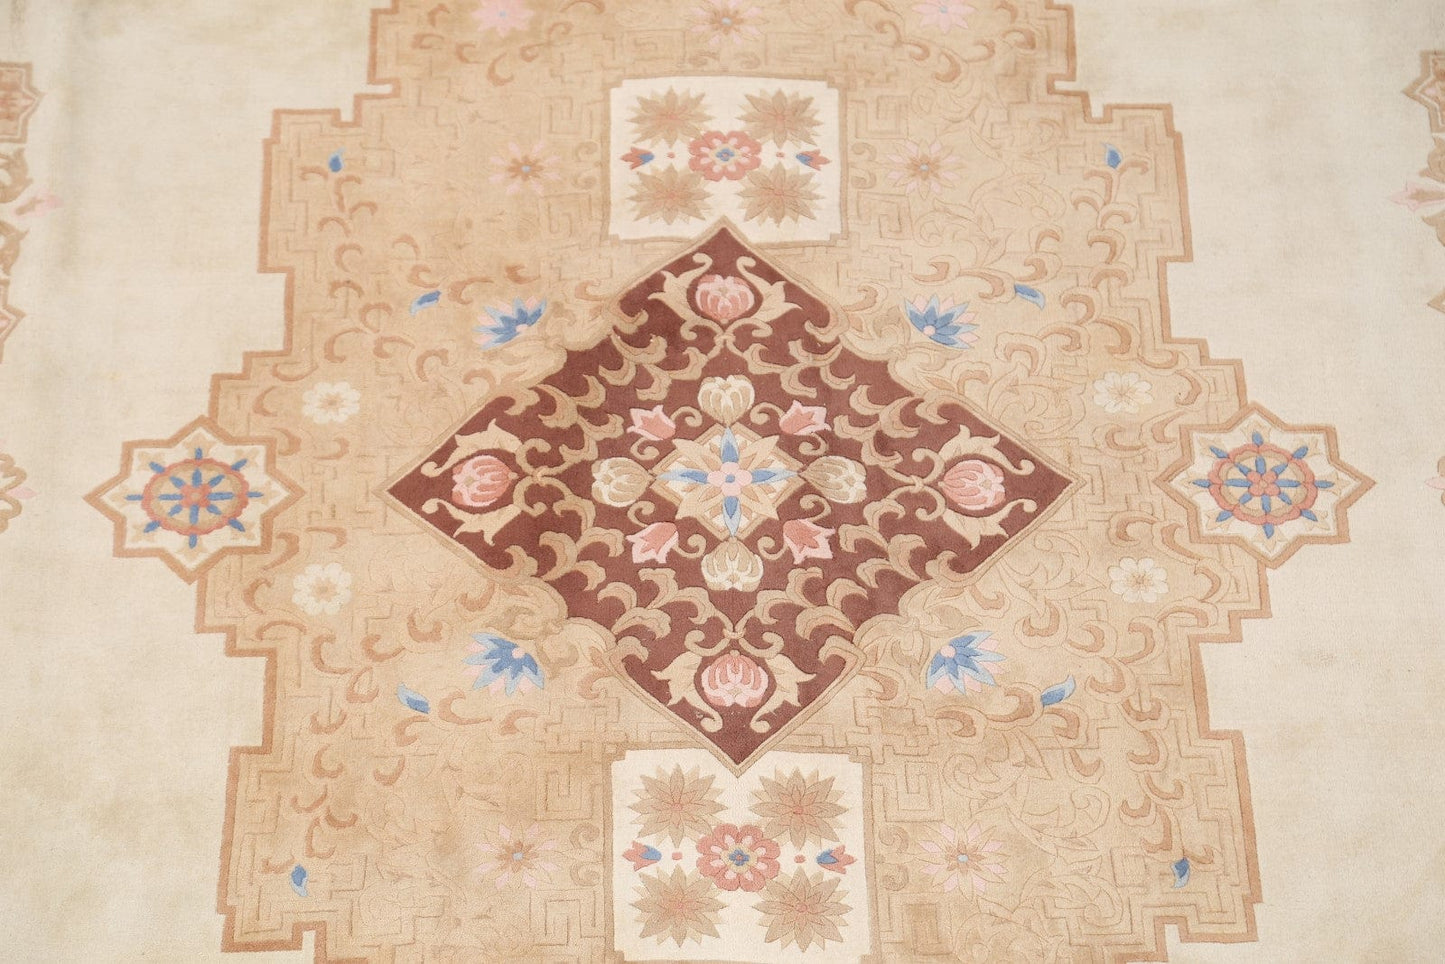 9x12 Aubusson Chinese Oriental Area Rug